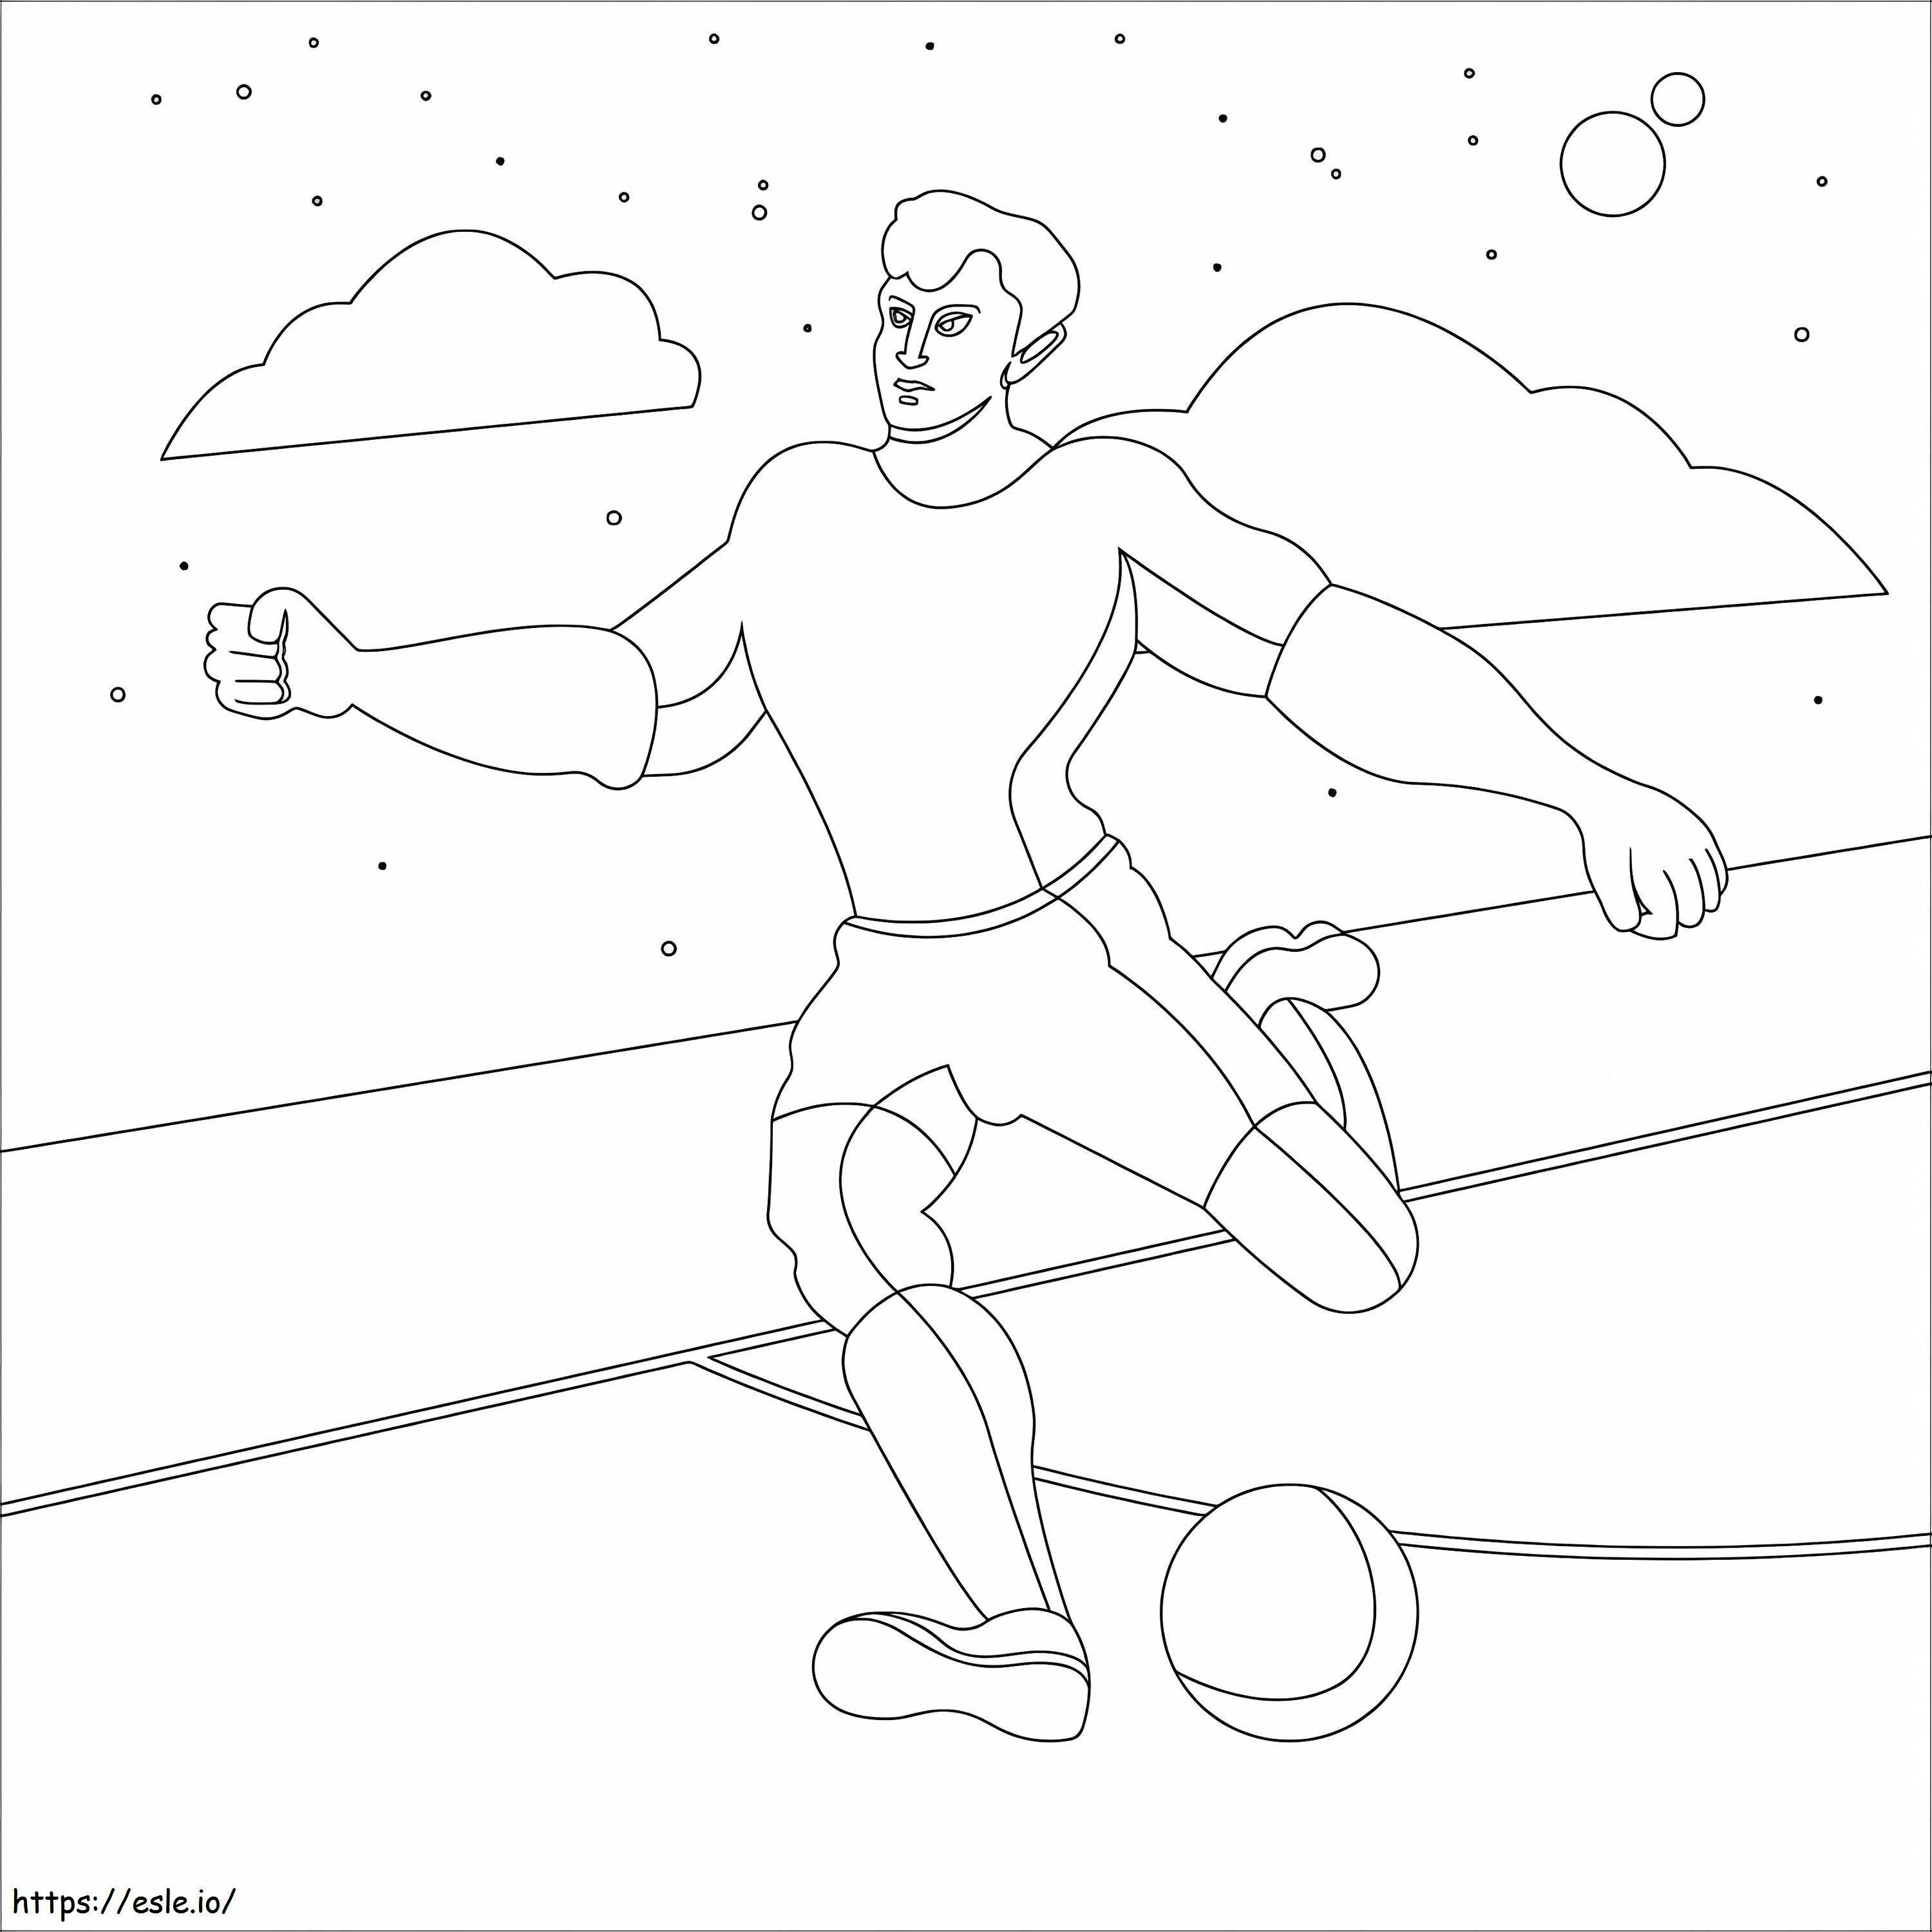 Cool Soccer Player coloring page